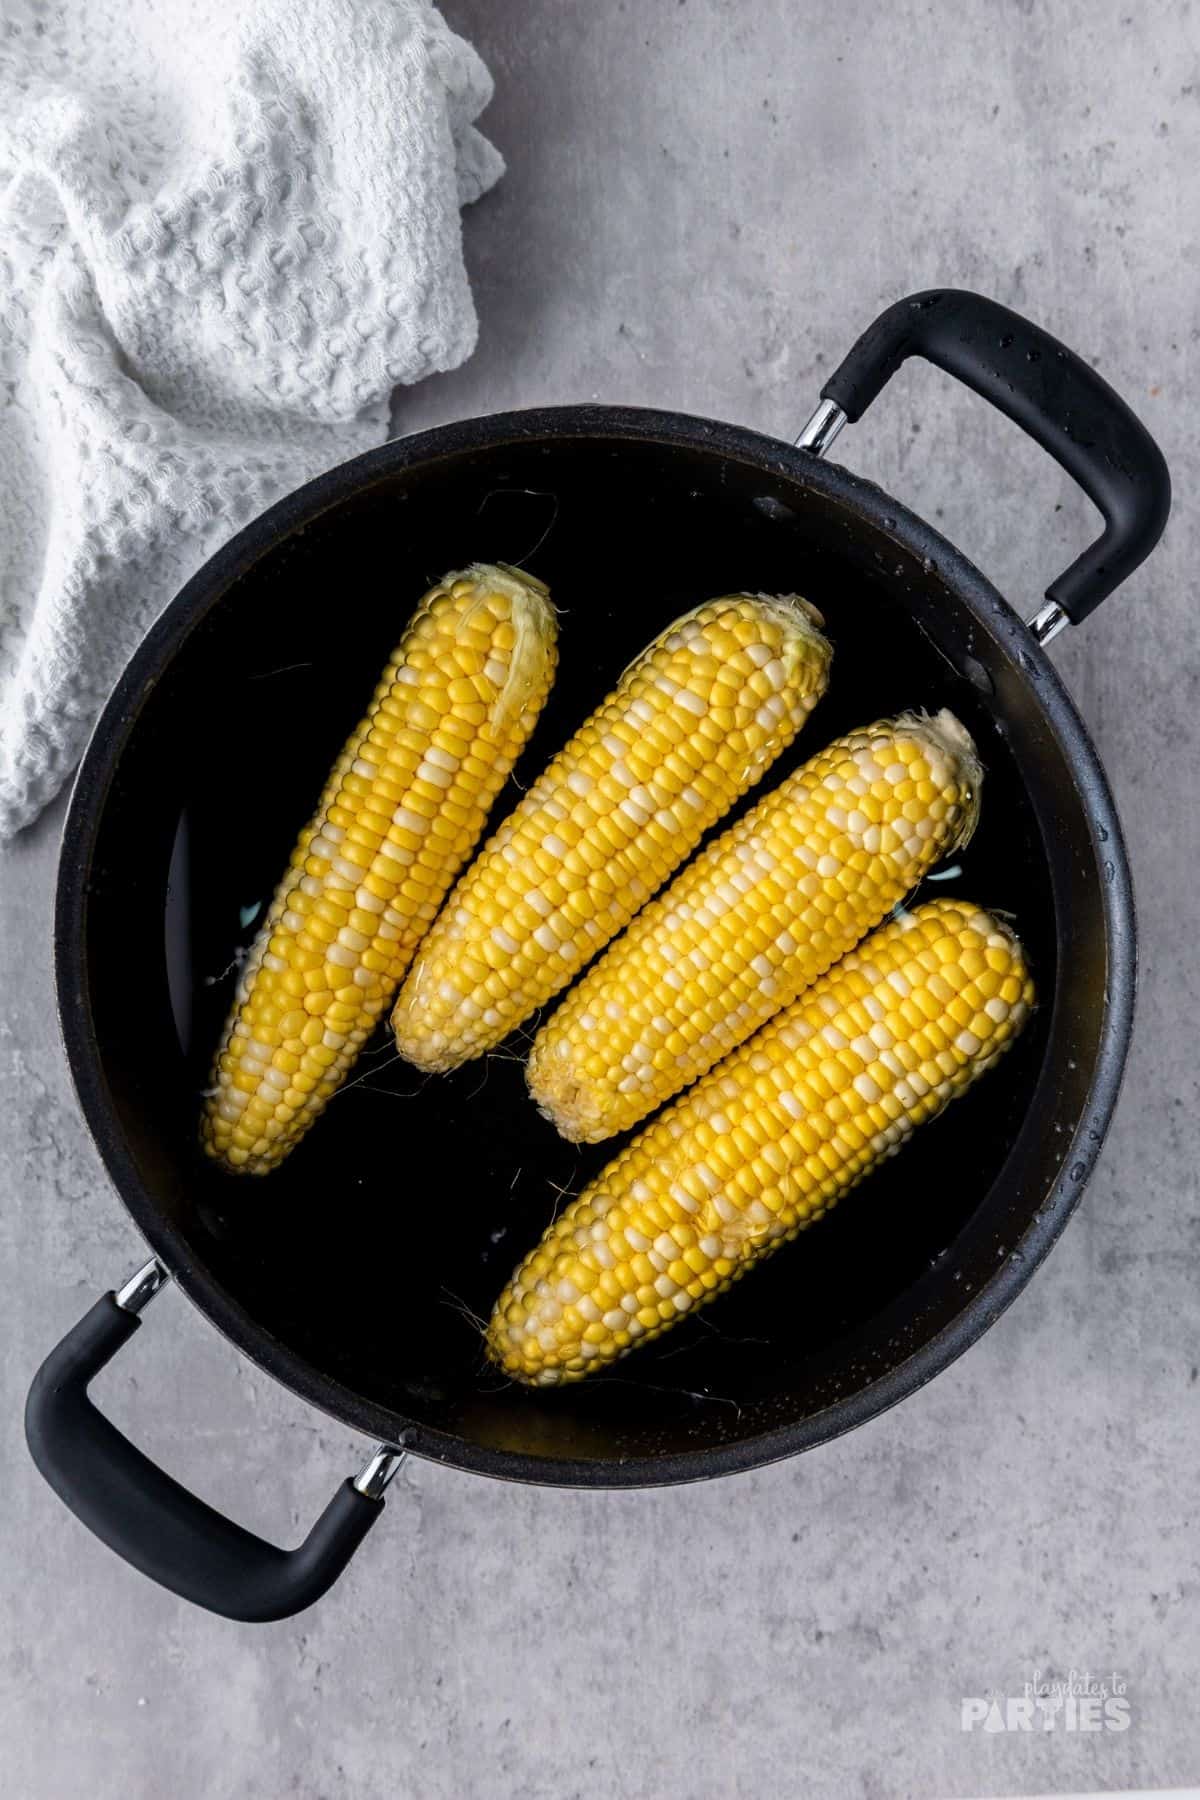 Four Ears of corn in a large pot of water.